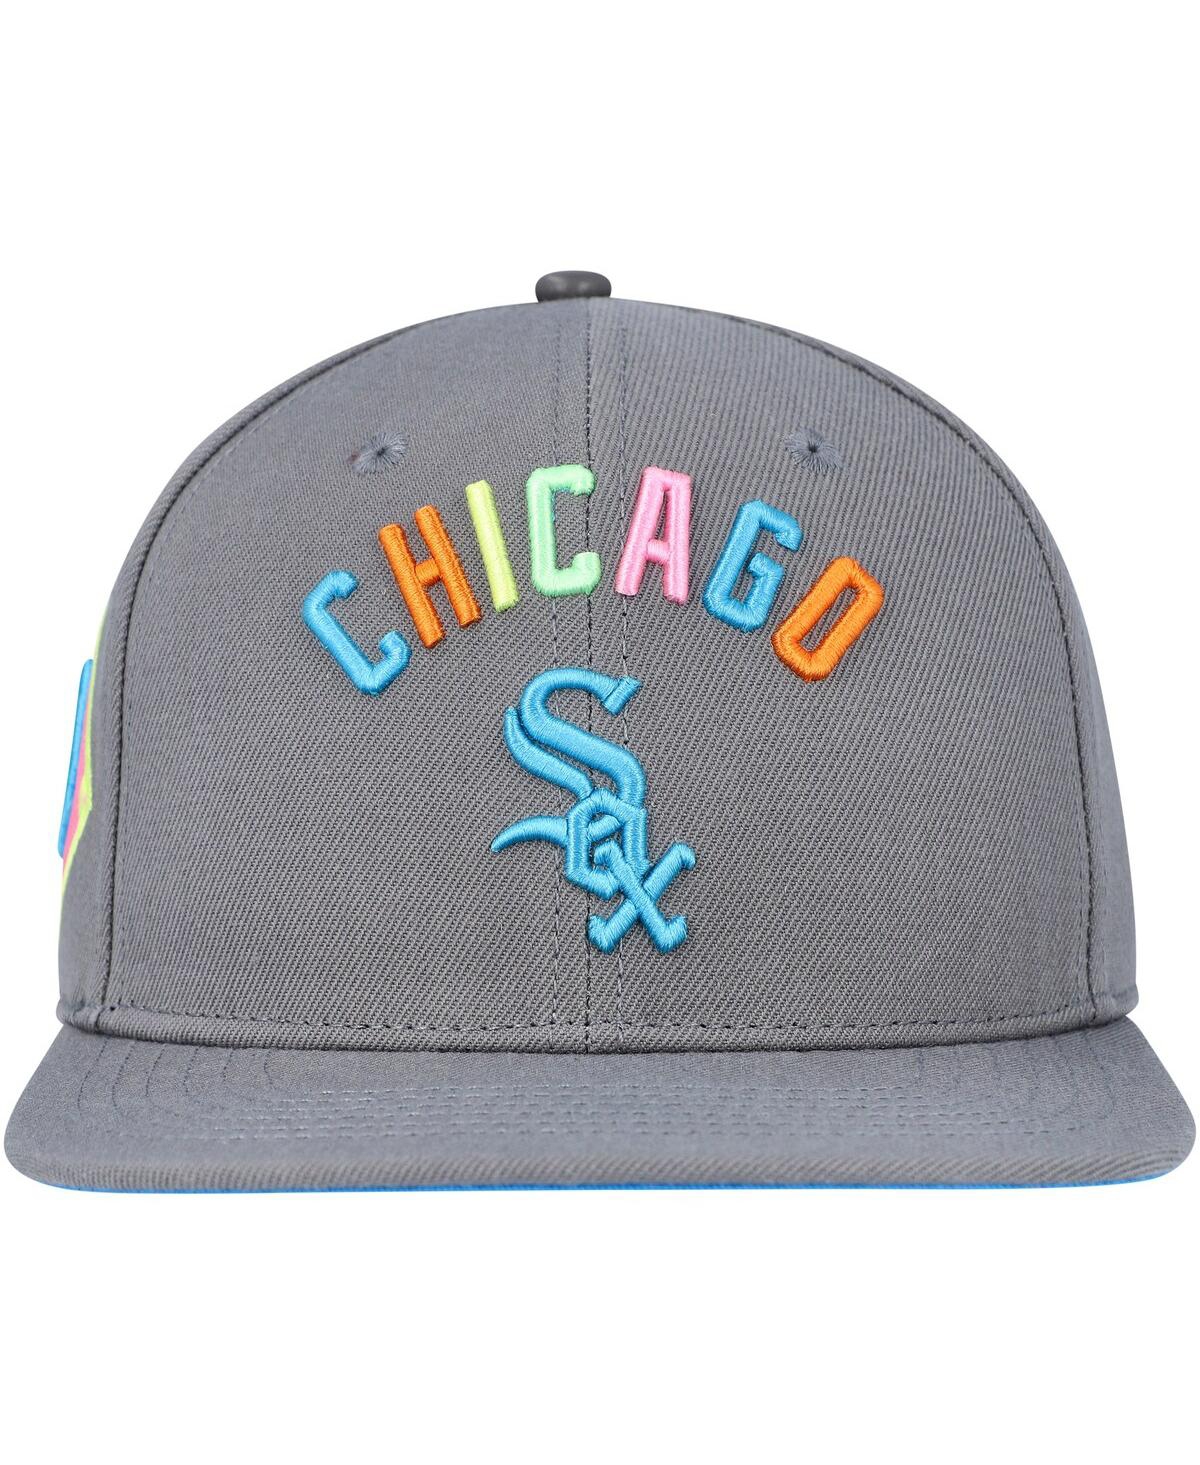 Shop Pro Standard Men's  Gray Chicago White Sox Washed Neon Snapback Hat